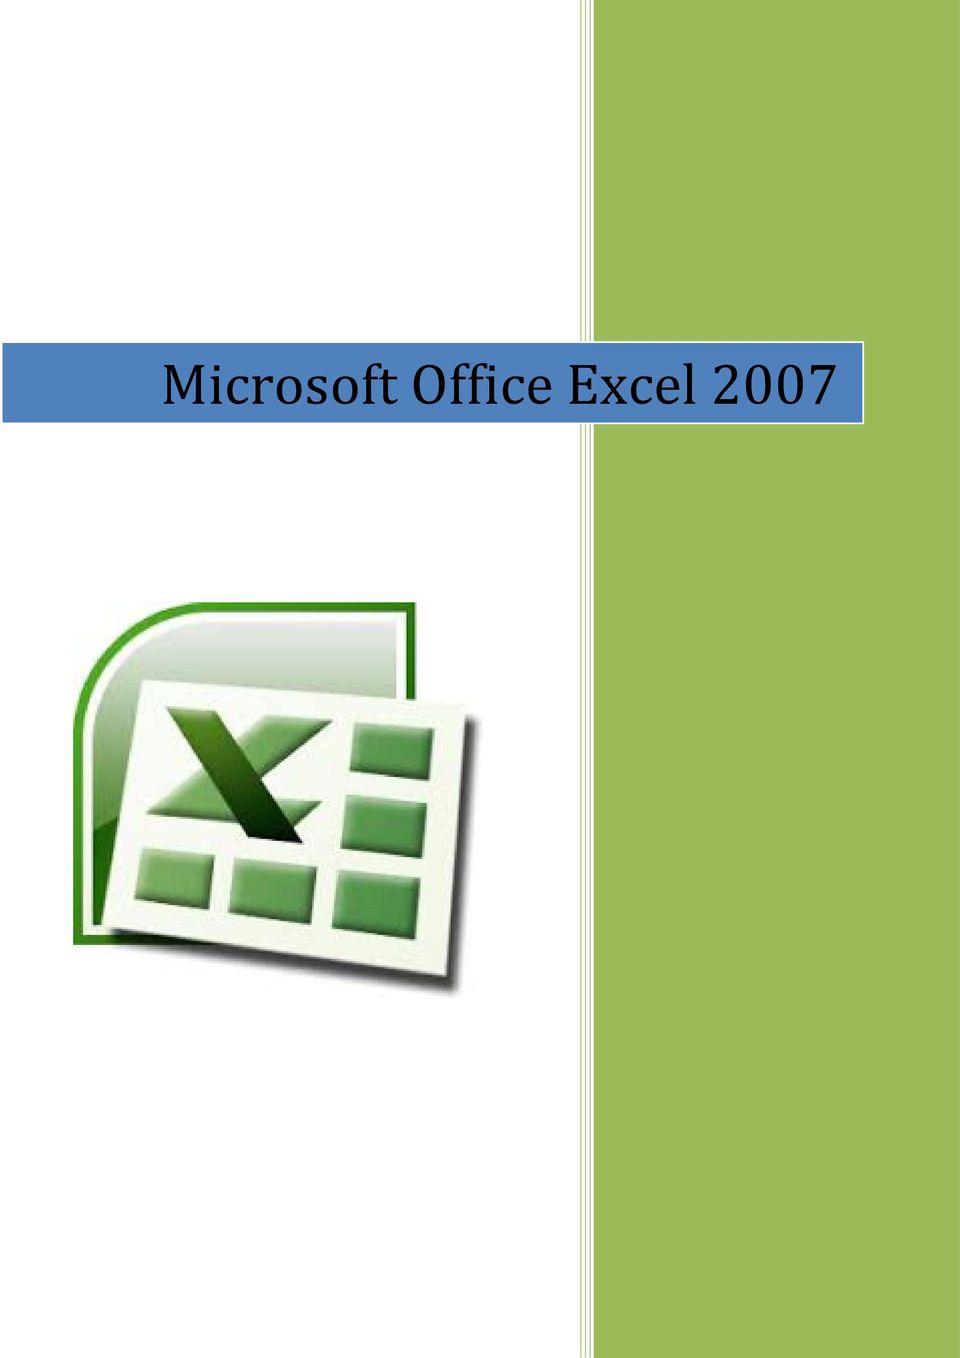 Microsoft Office Excel PDF Free Download